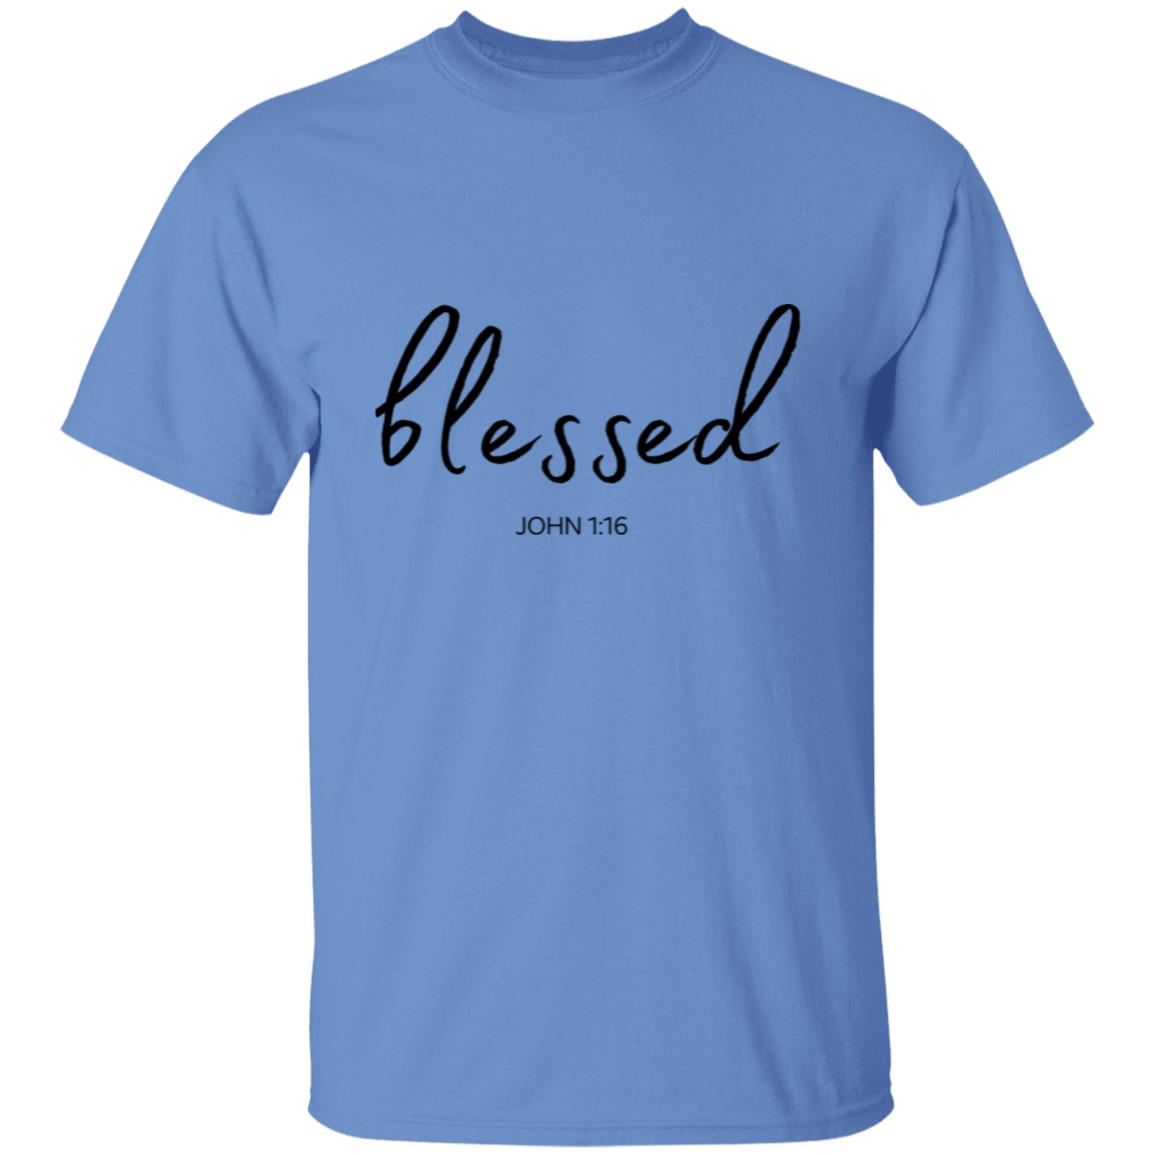 Get trendy with Blessed (John 1:16) T-Shirt: Words of Faith Series (Black Text) - T-Shirts available at Good Gift Company. Grab yours for $21.95 today!